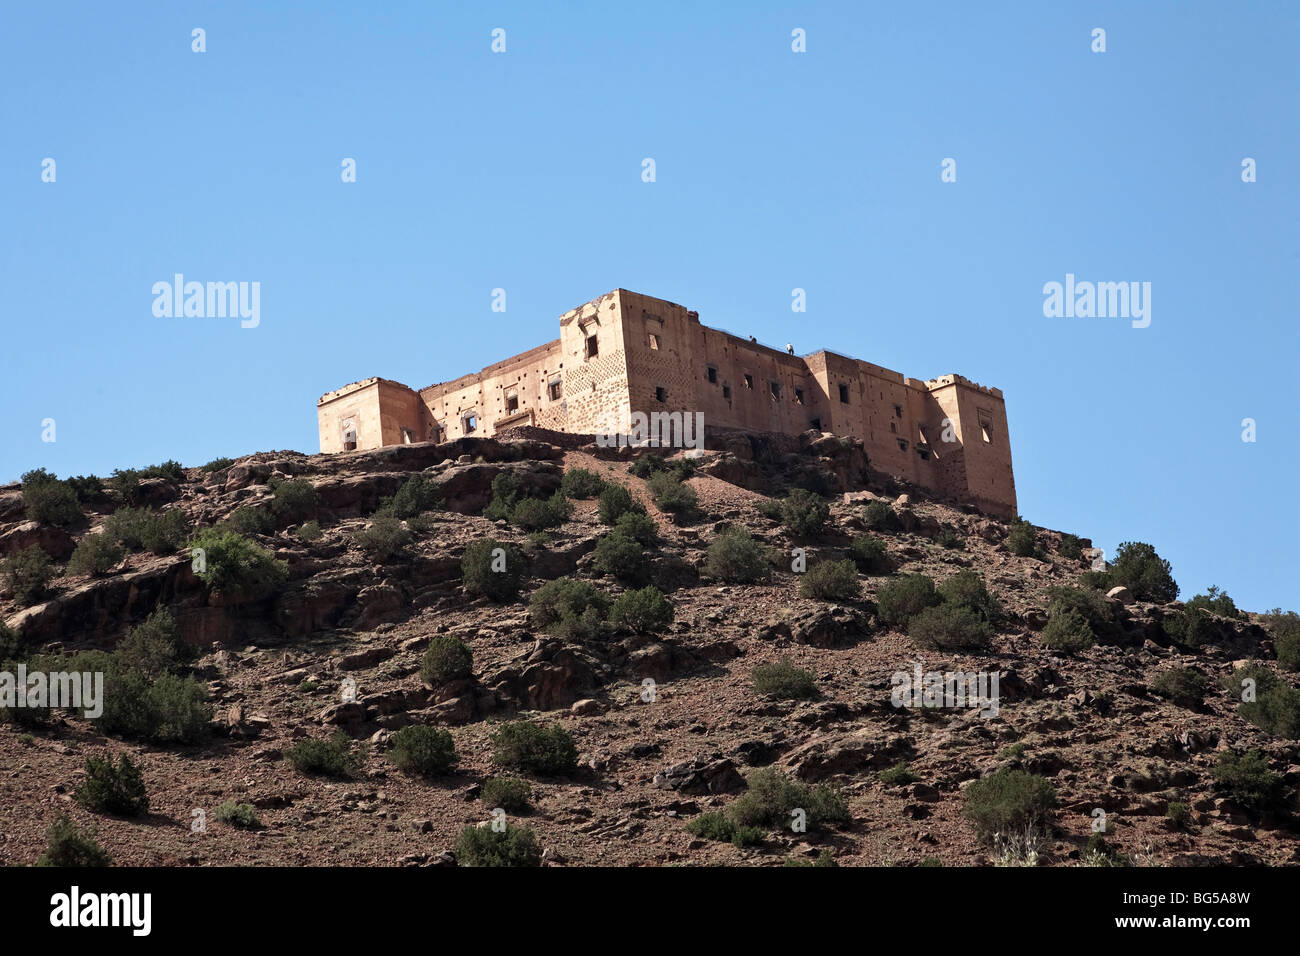 Ruined castle in the High Atlas Mountains, Morocco Stock Photo